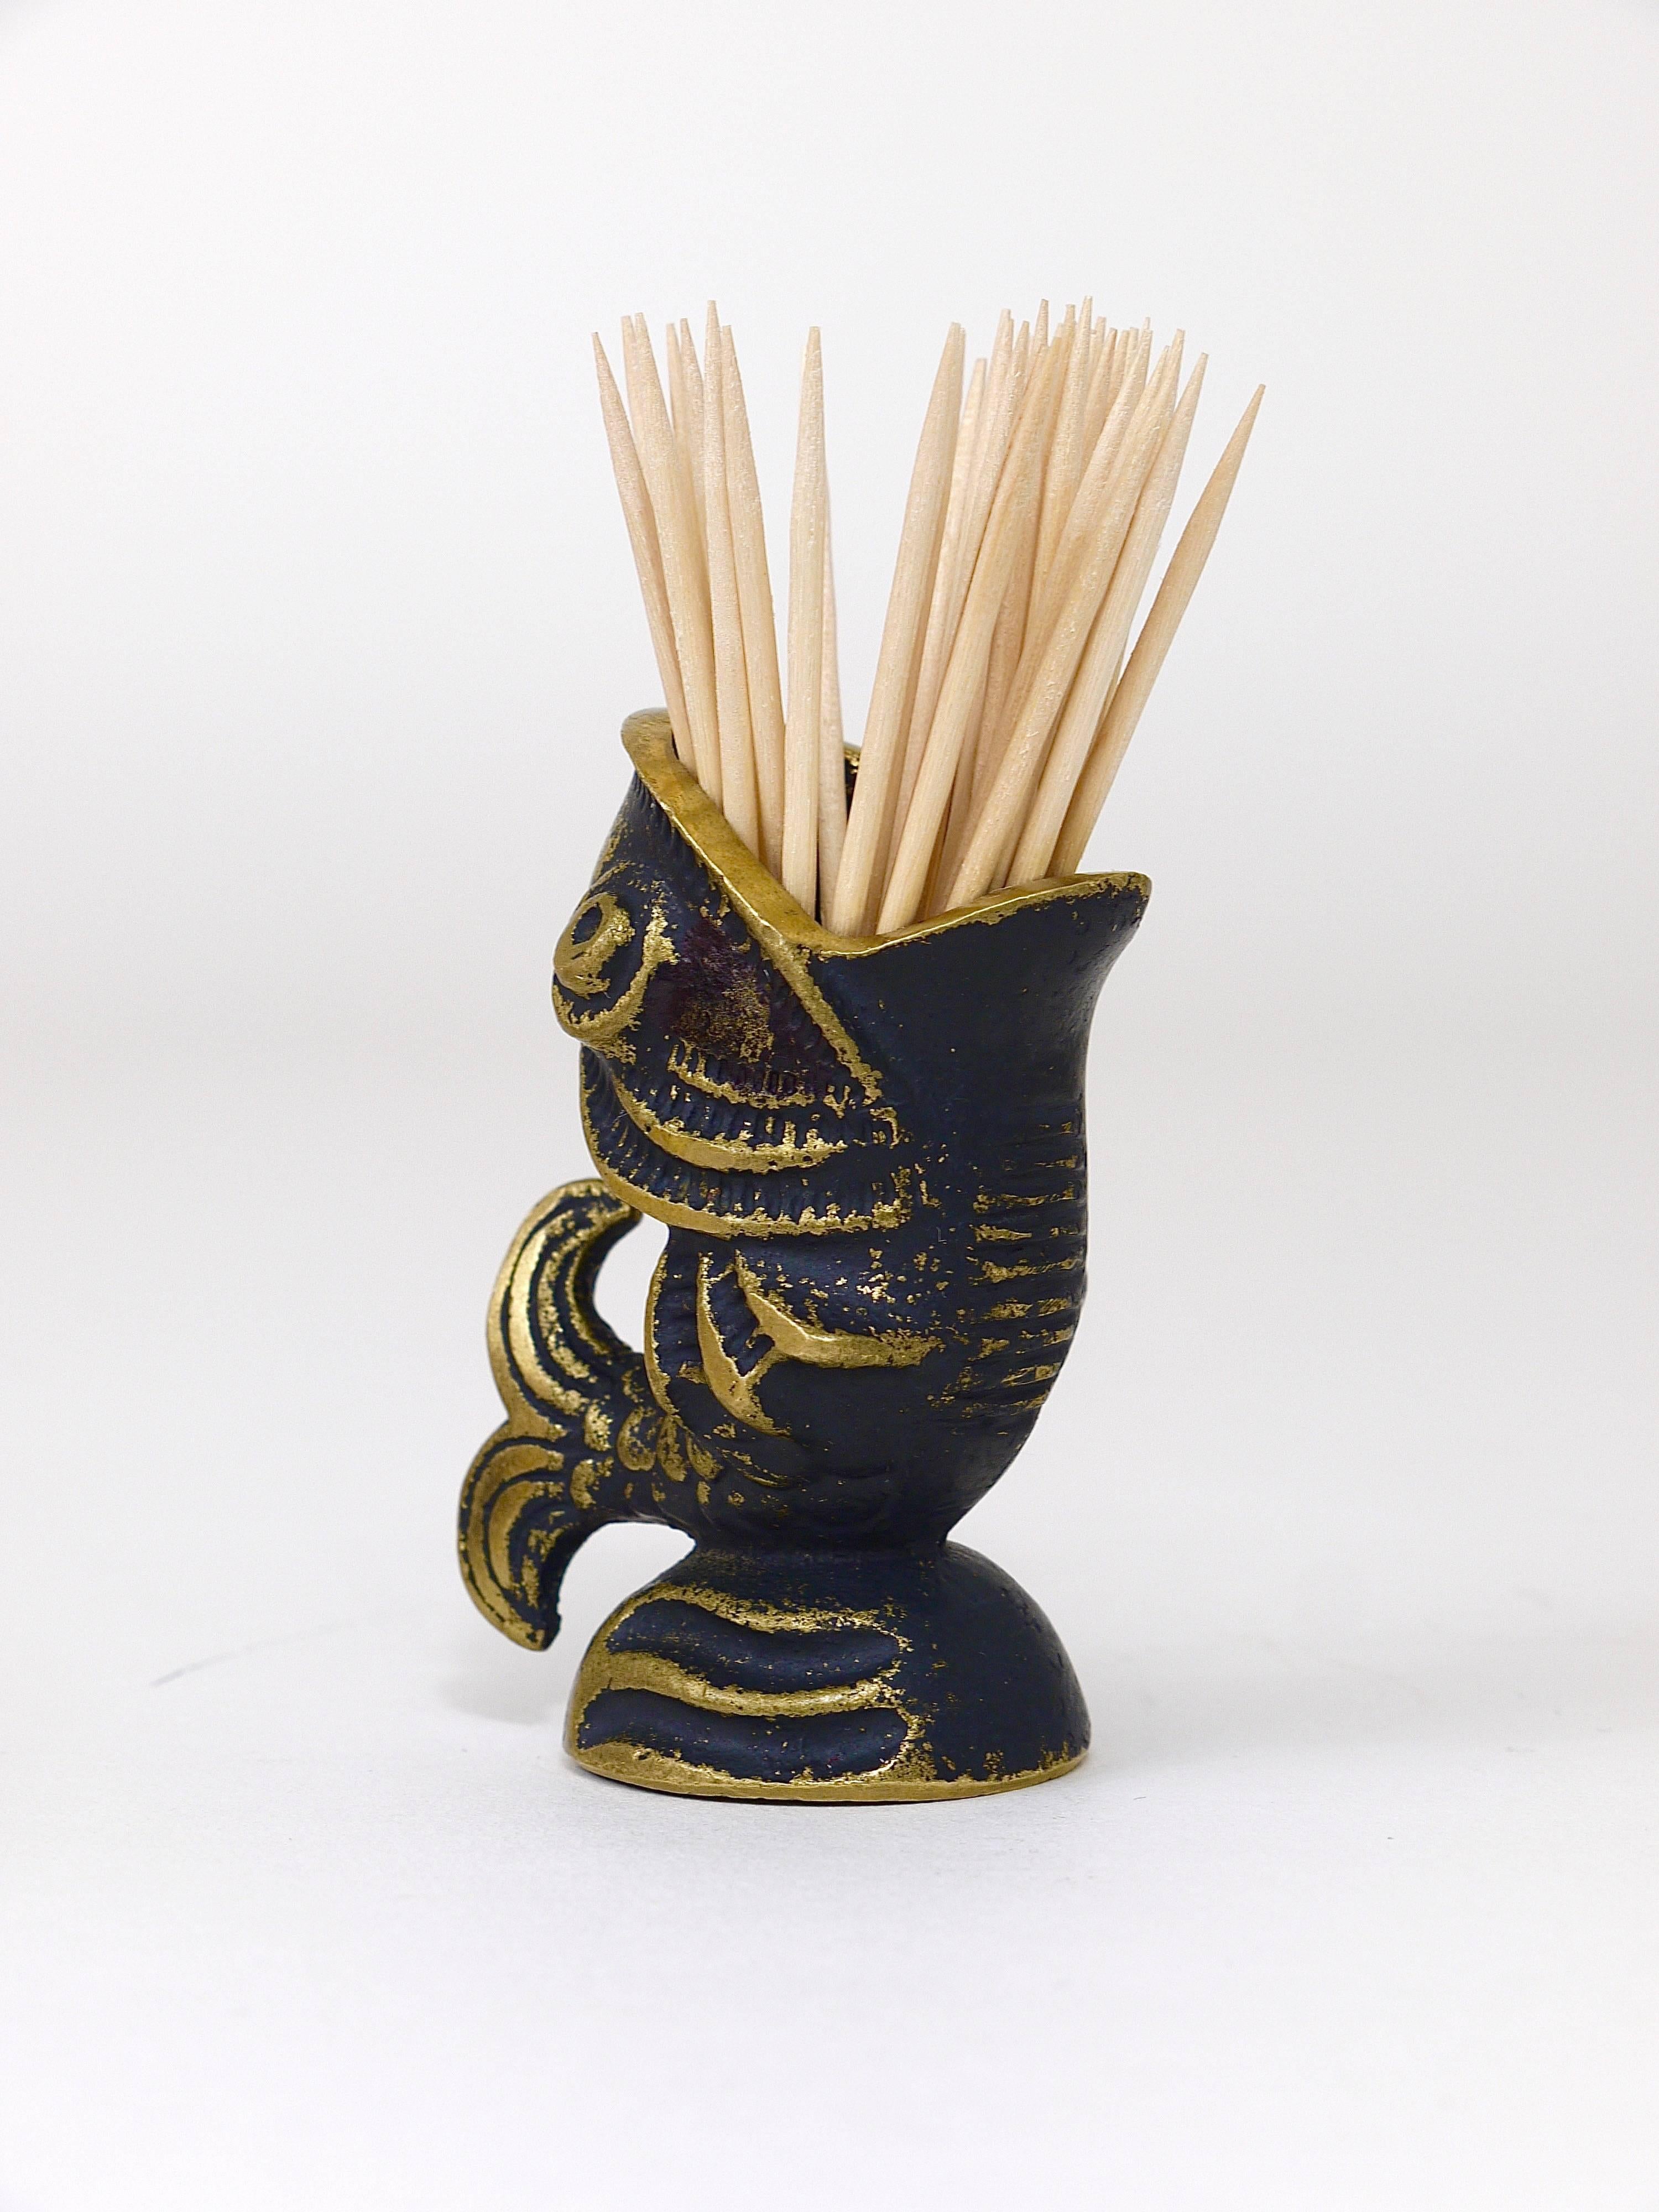 A toothpick holder in the shape of a fish. A very humorous design by Walter Bosse, executed by Hertha Baller Austria in the 1950s. Made of solid brass, in good condition with patina.